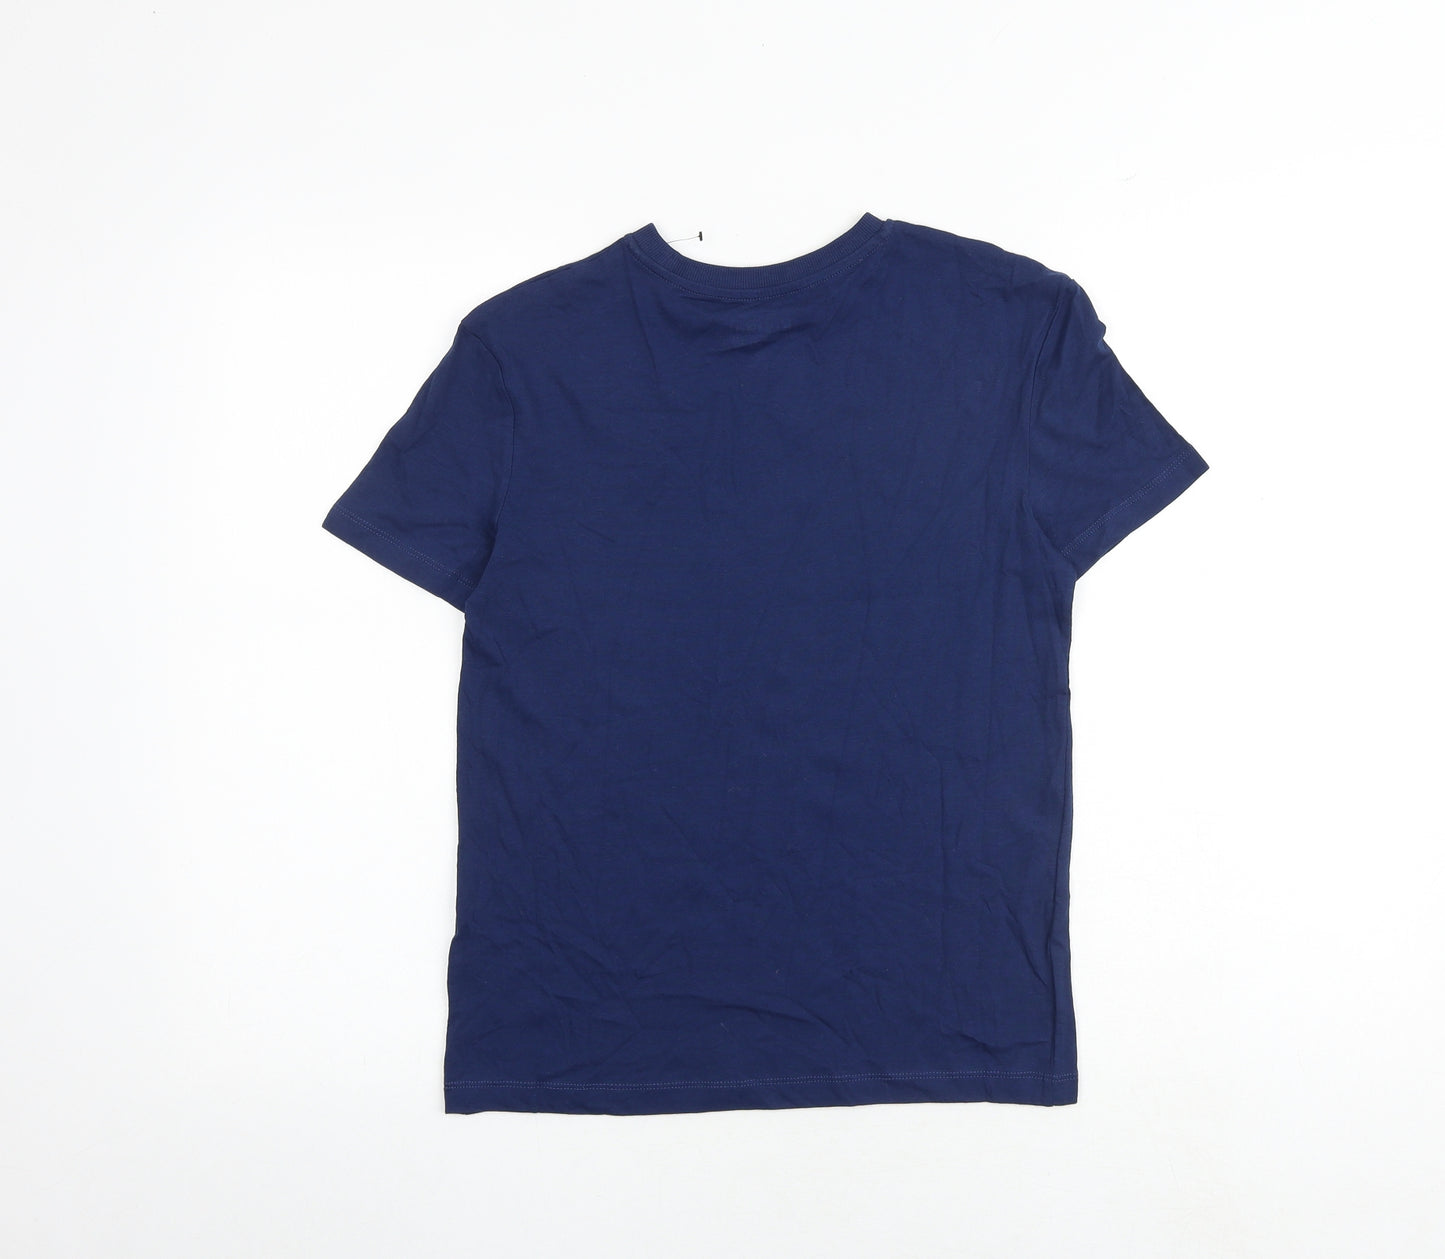 Marks and Spencer Boys Blue Cotton Basic T-Shirt Size 13-14 Years Round Neck Pullover - Today is a good day